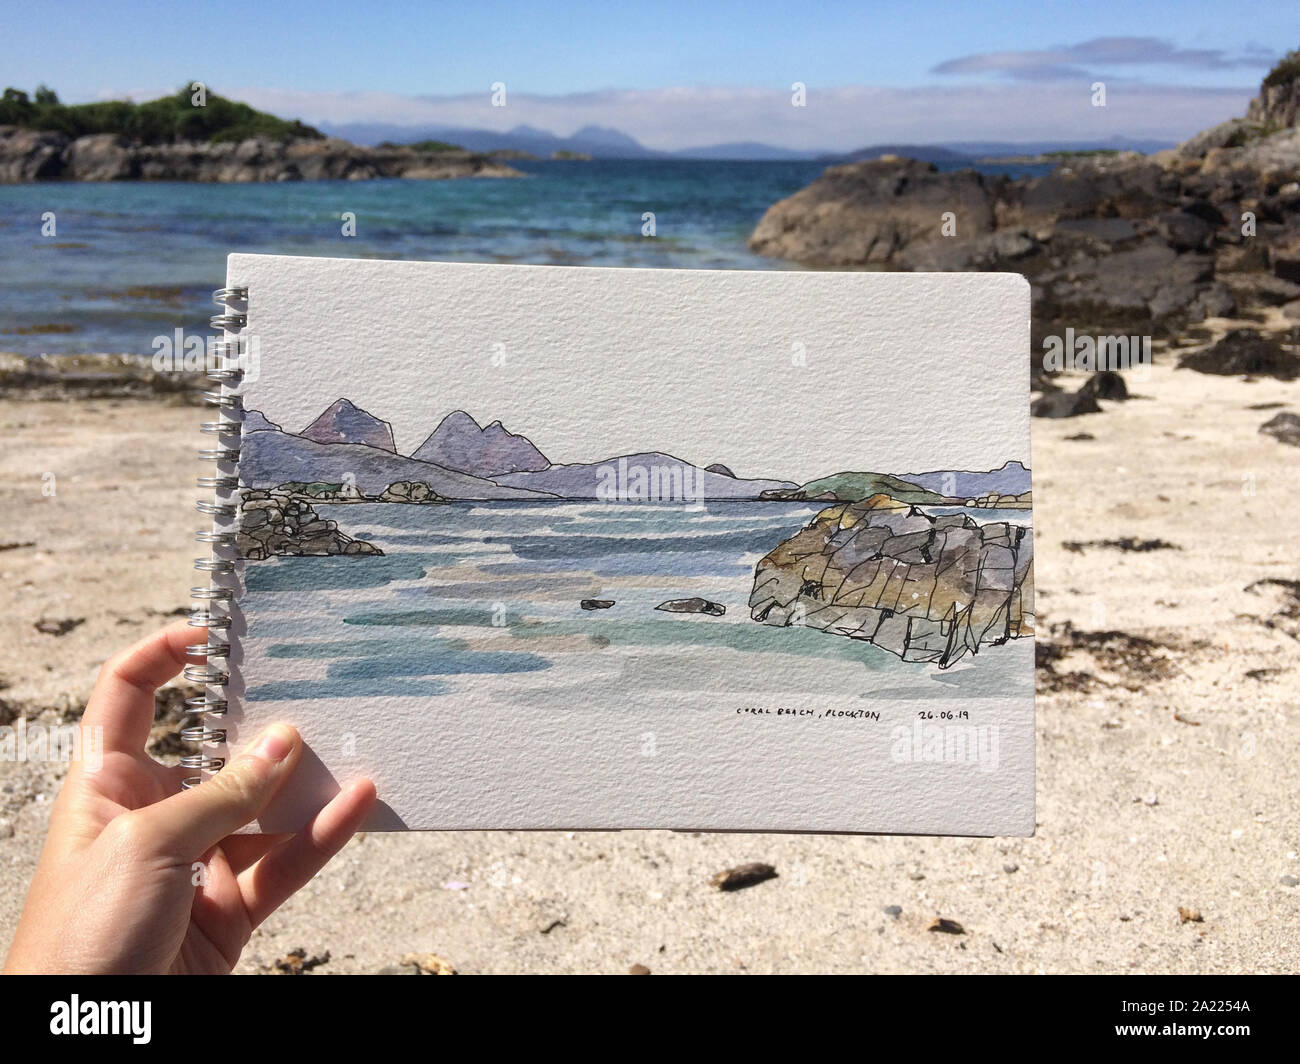 https://c8.alamy.com/comp/2A2254A/painting-of-the-view-from-coral-beach-near-plockton-held-up-in-front-of-the-subject-the-coral-beach-with-isle-of-skye-on-horizon-2A2254A.jpg